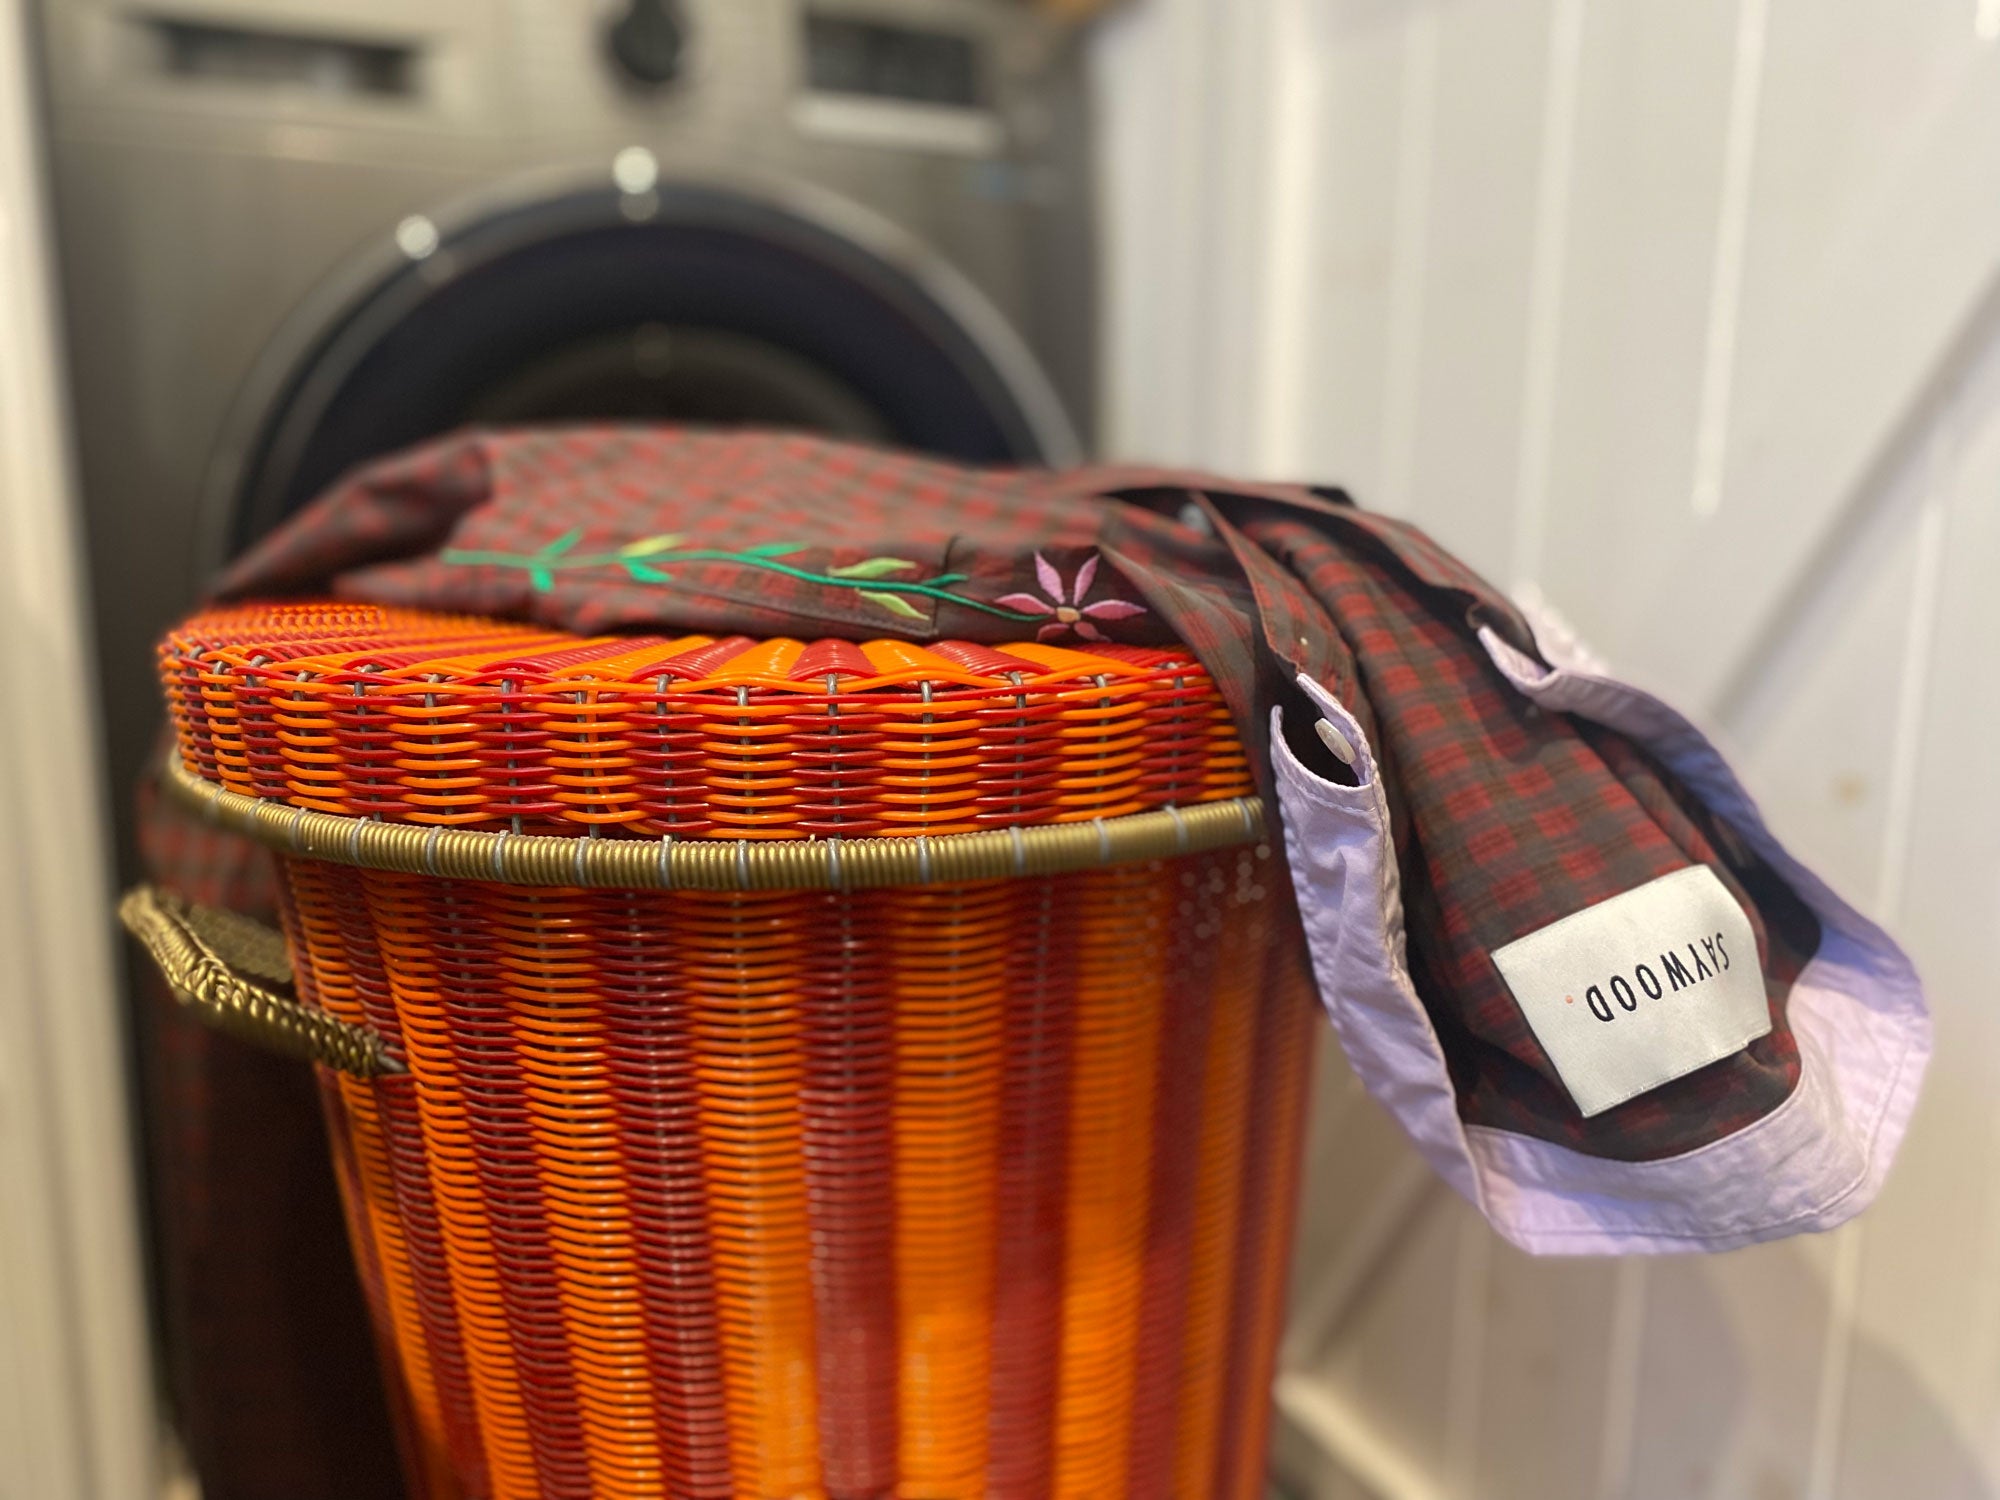 An orange and red woven laundry basket sits in front of a washing machine. On top of the basket lid lies Saywood's Etta Oversized Shirtdress in red check. The lilac collar is open and the Saywood label can be seen.